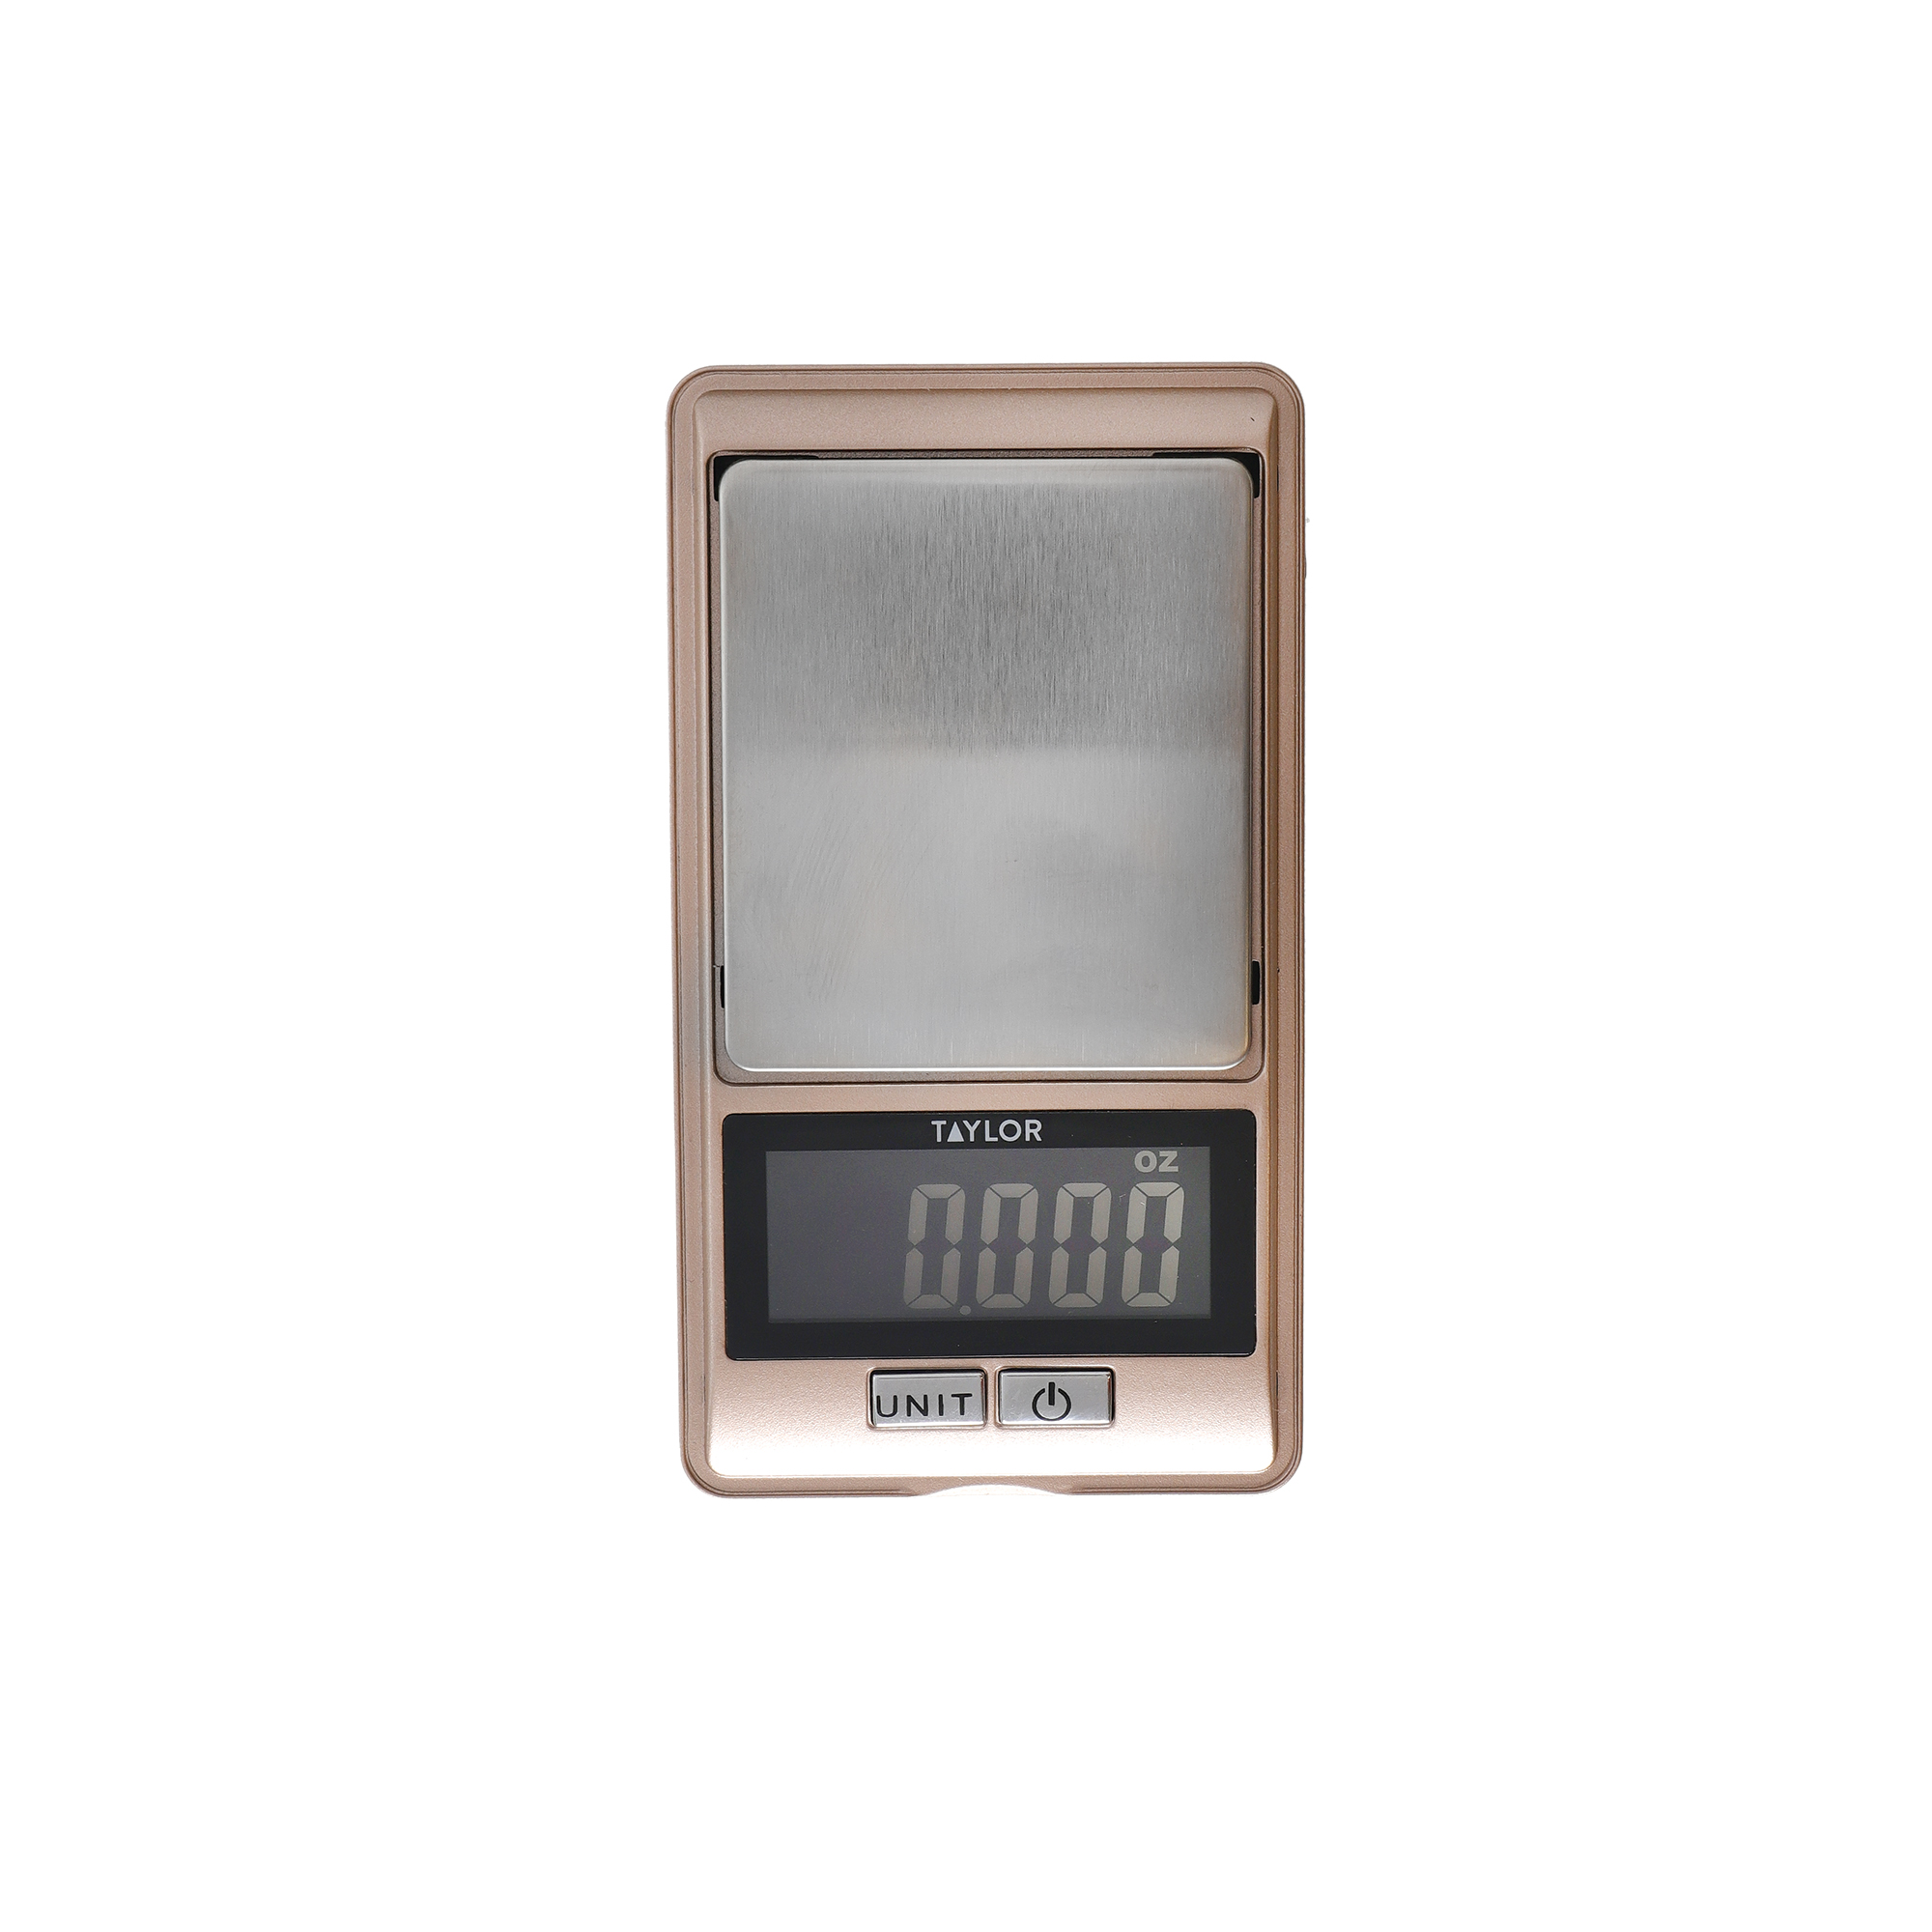 Taylor Pro .1g Precision Pocket Kitchen Scales in gift box - Rose Gold- 11.5cm